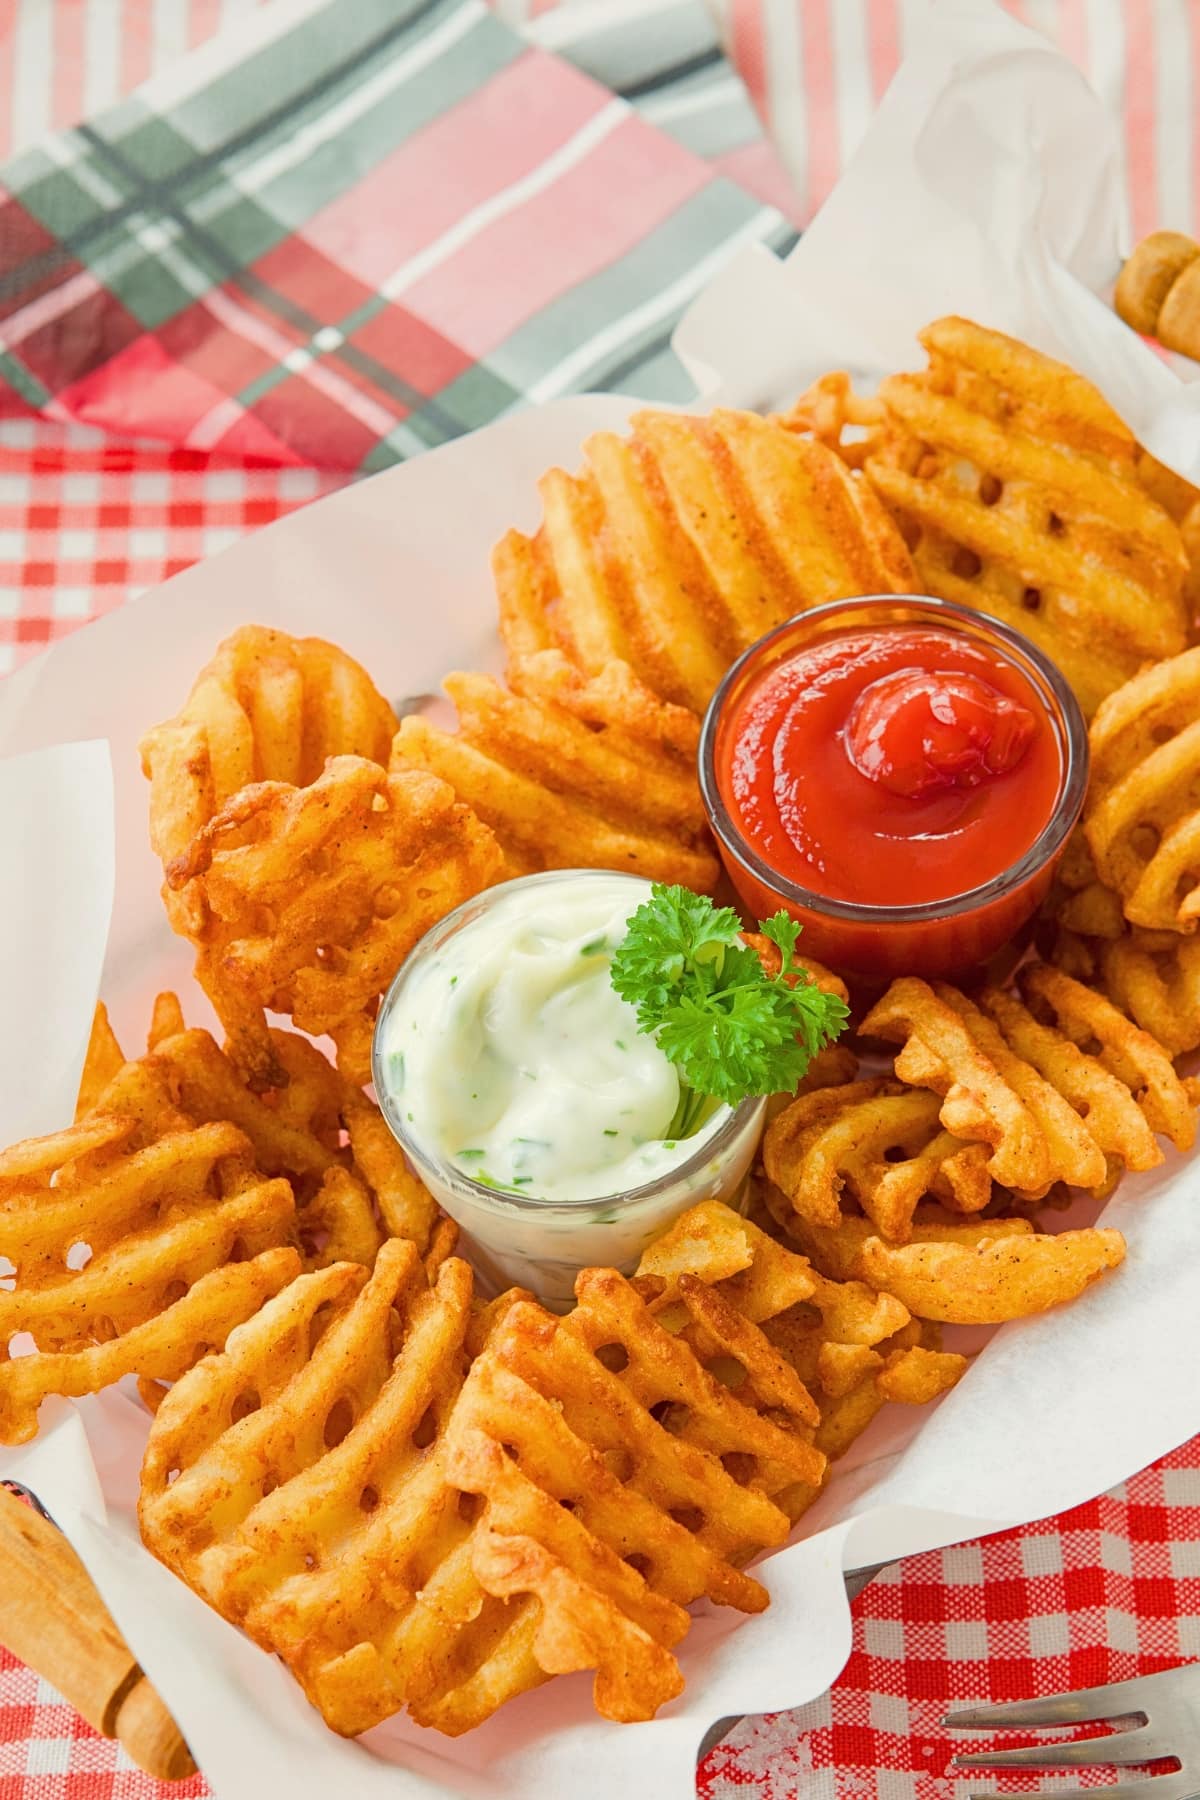 Bunch of air fries waffle fries in a basket with lining served with ketchup and mayo dip.